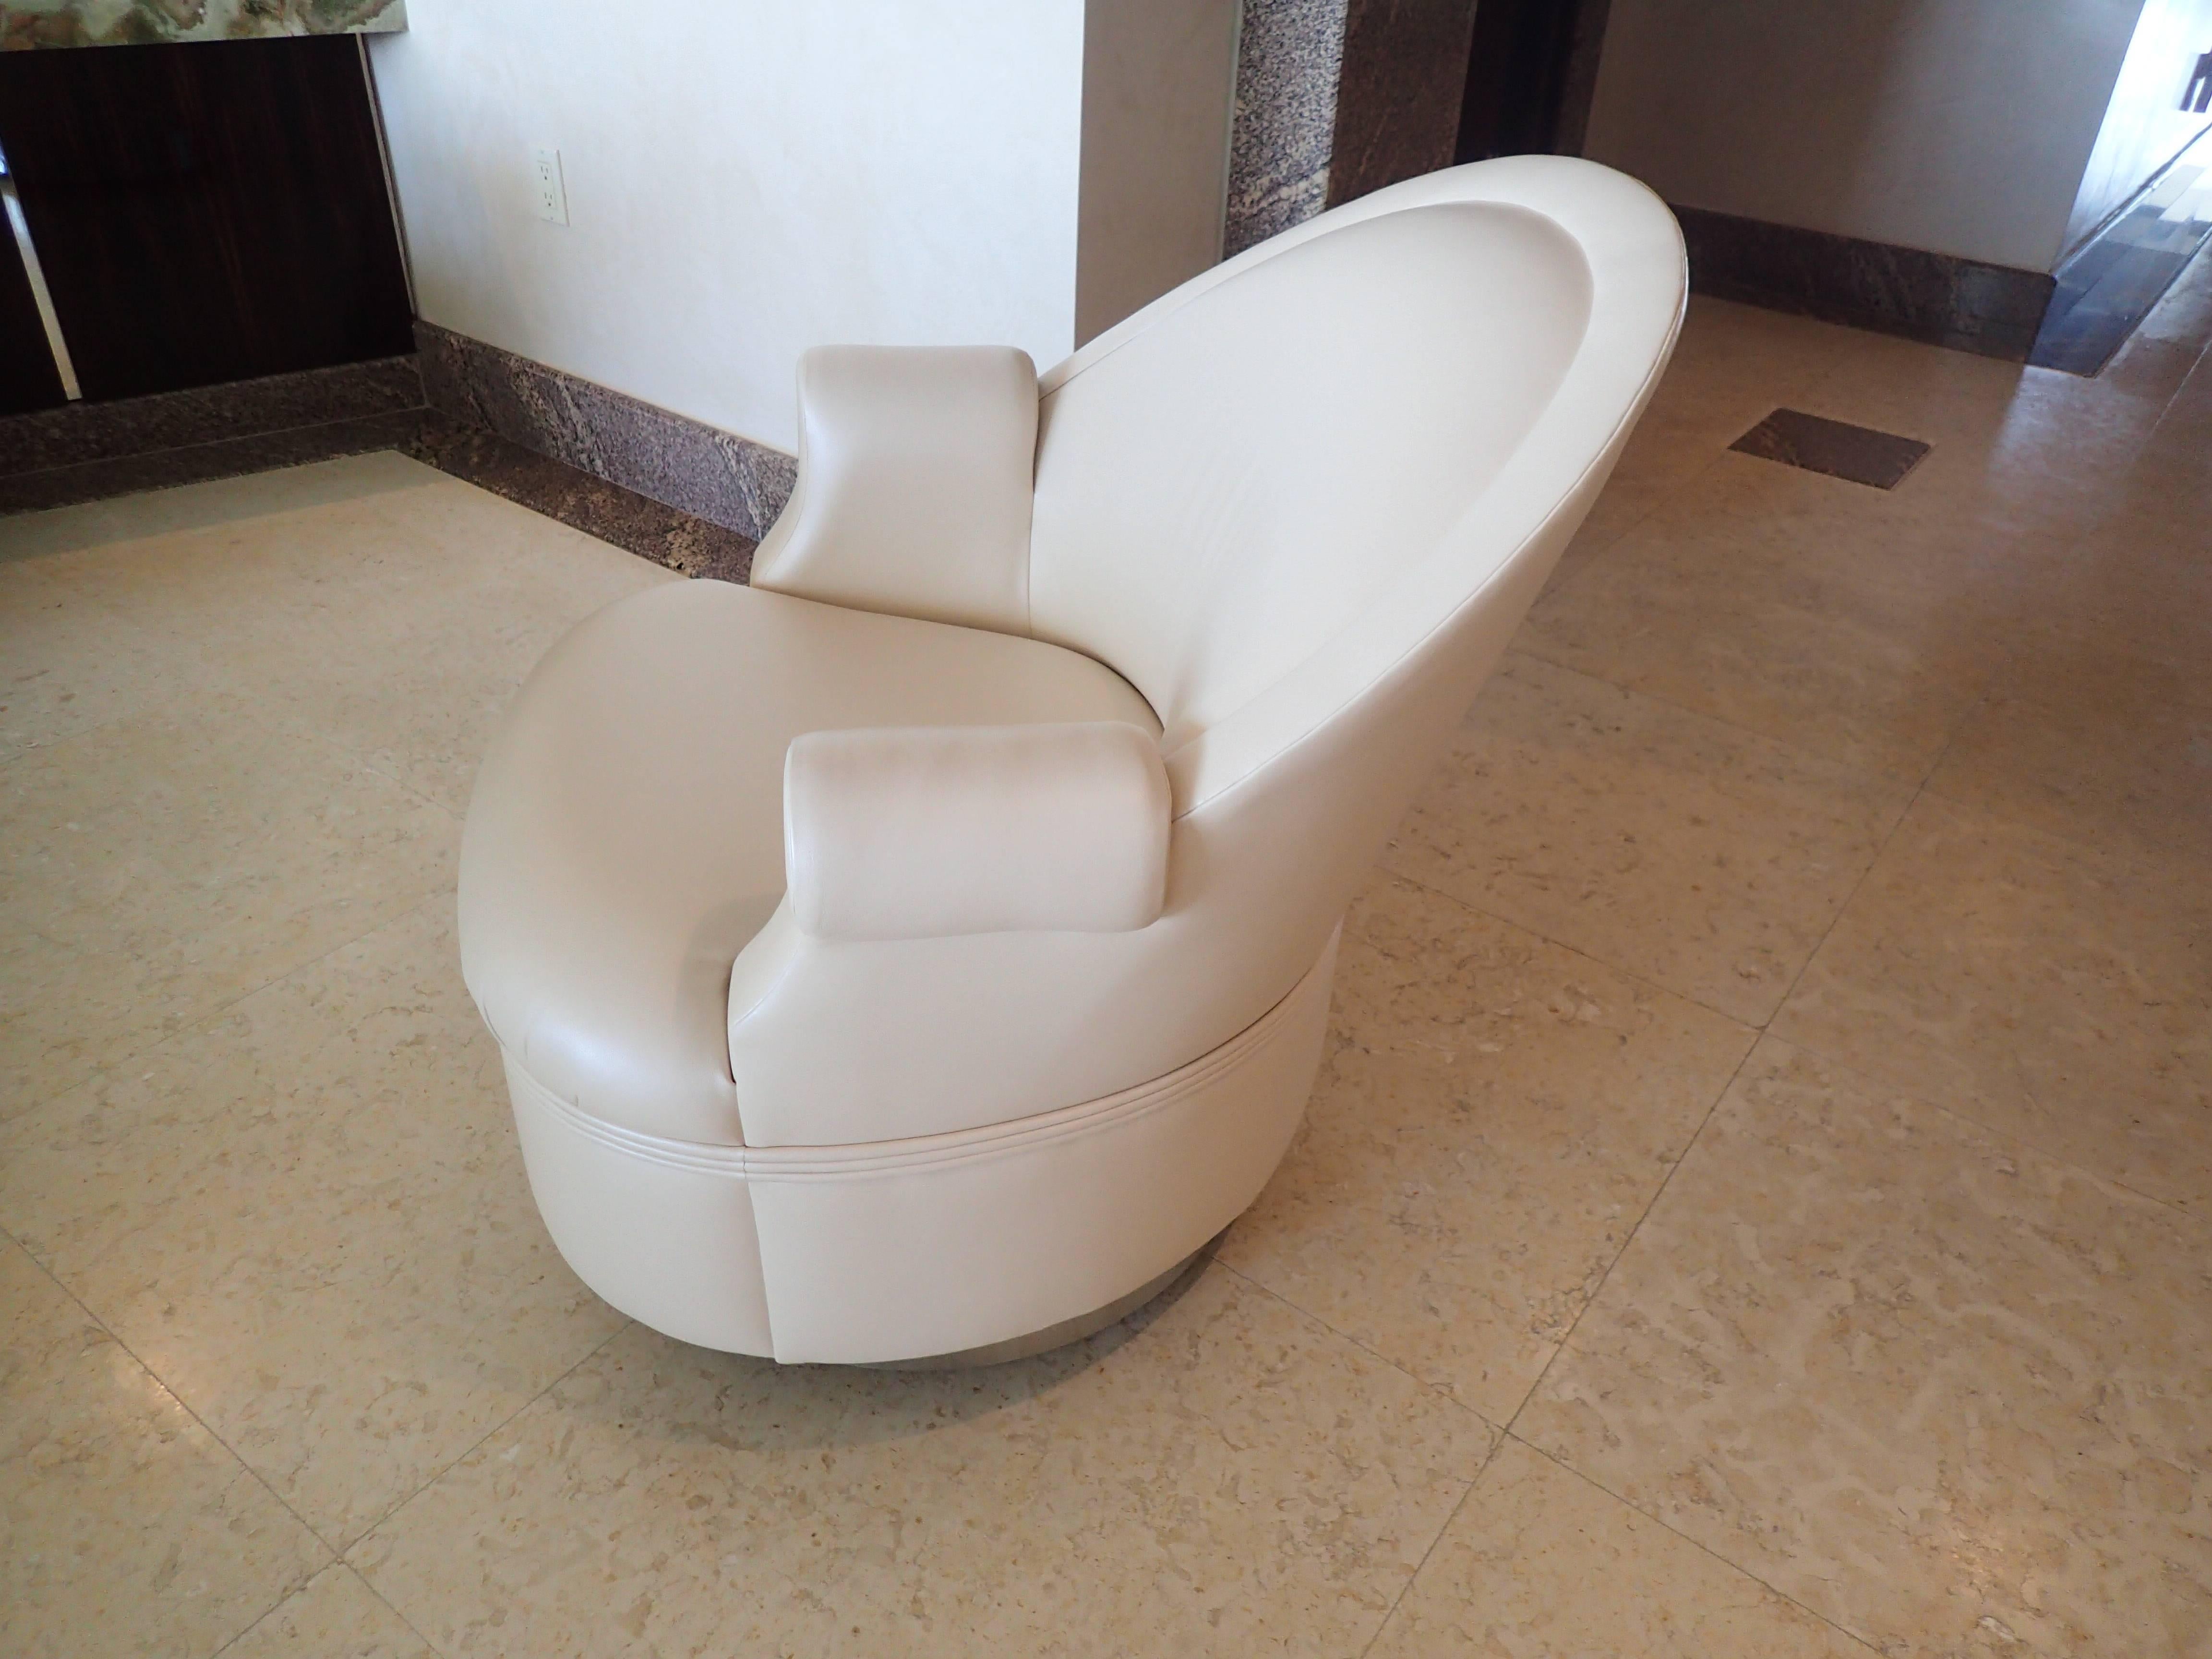 These chairs swivel and are on castors. The leather is in excellent condition and the stainless base is as well.